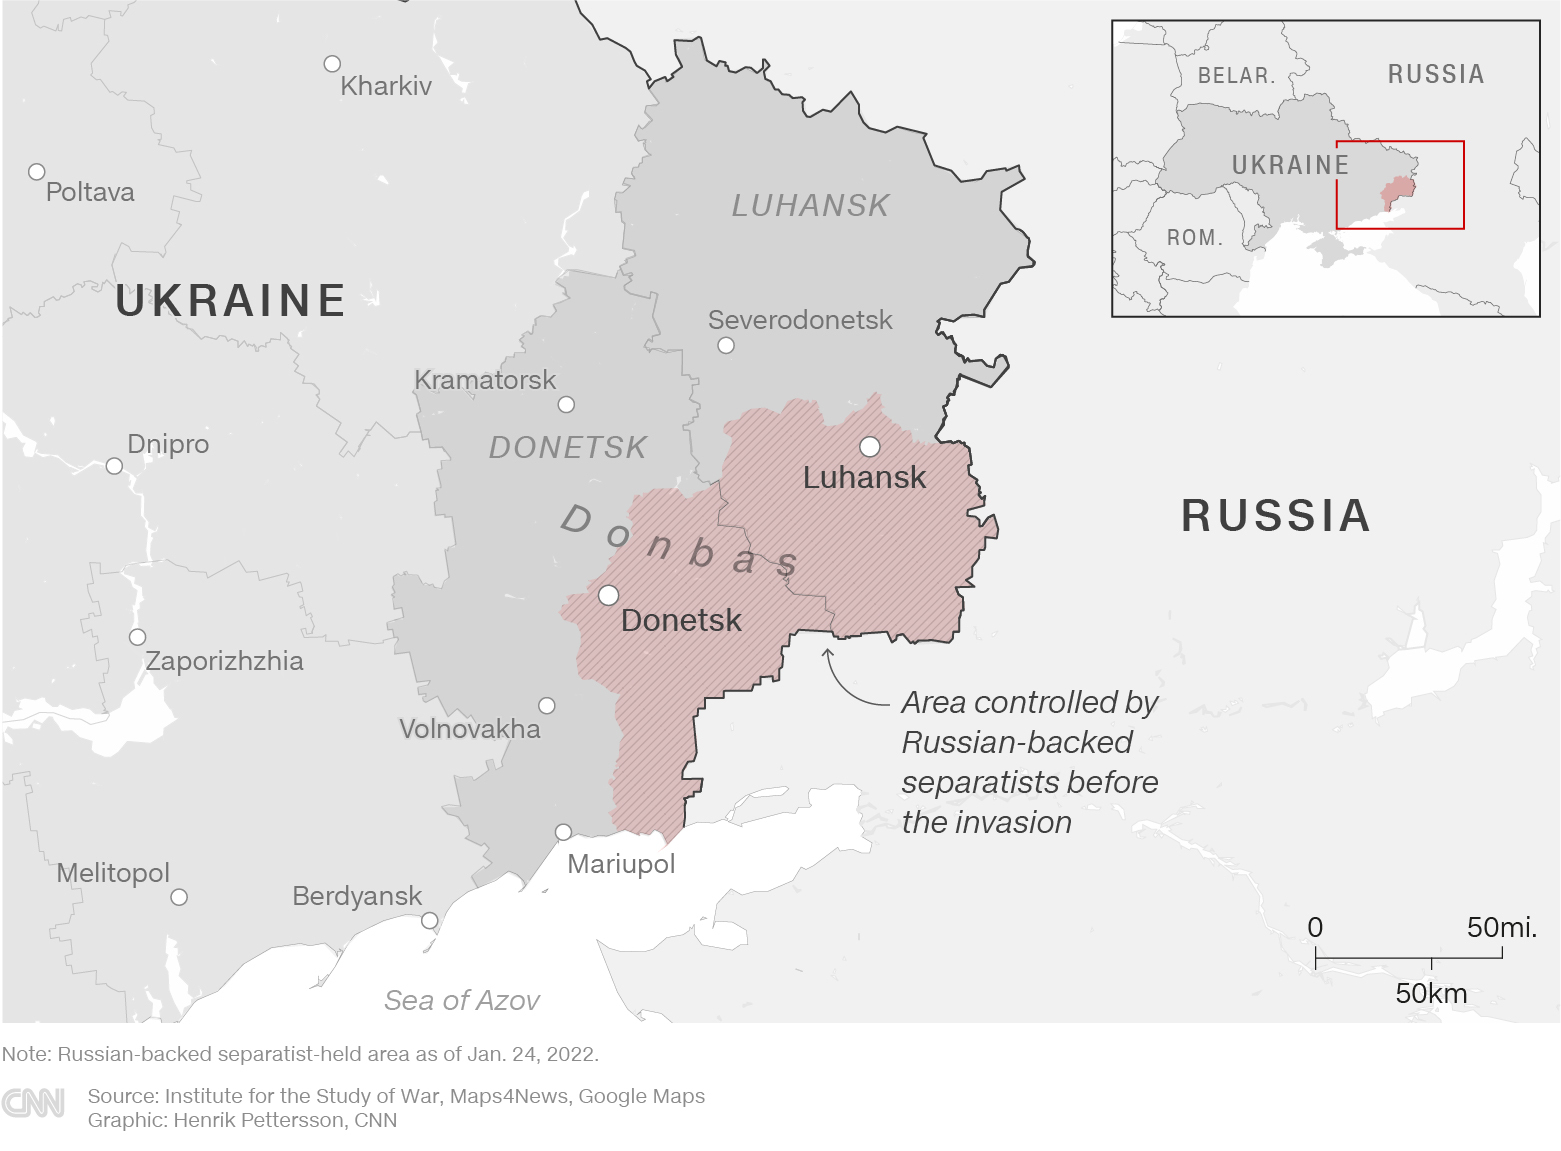 Maps showing the region and what part of it has been under Russian control since before the invasion.